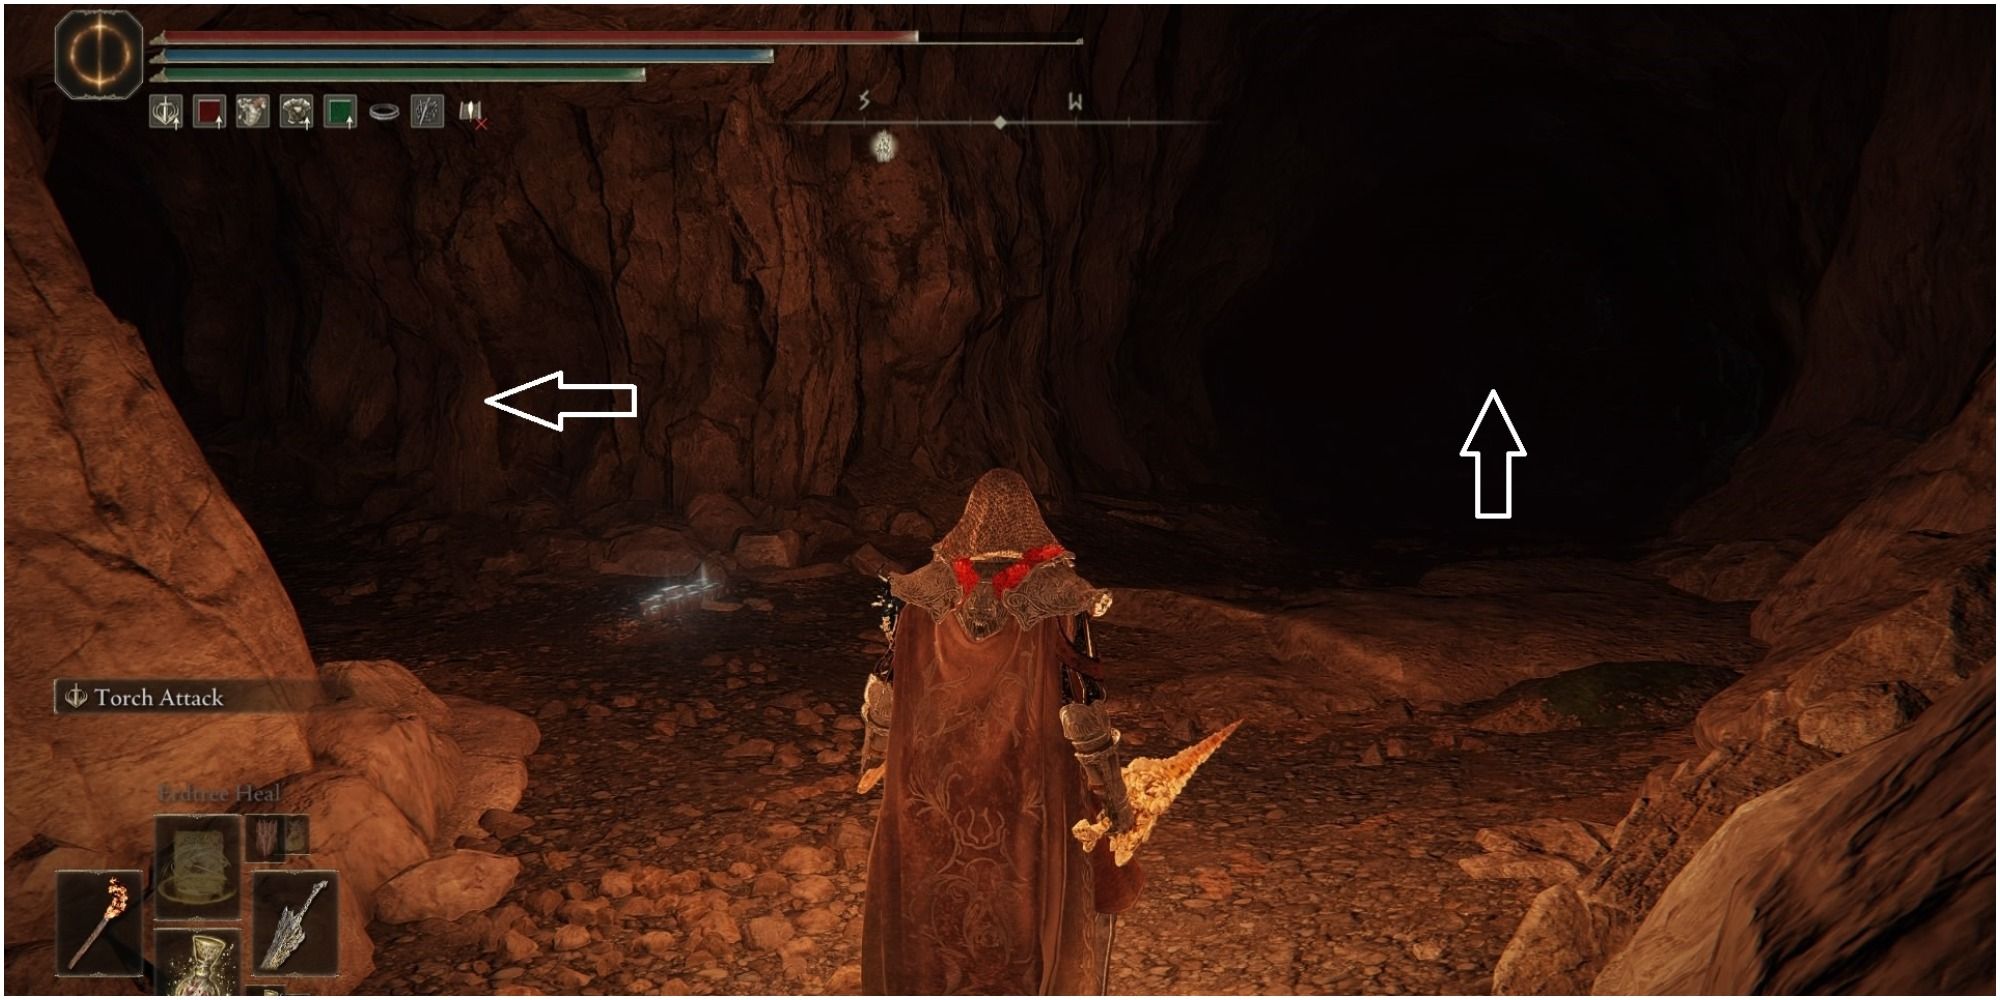 The player reaching two paths inside the cave.